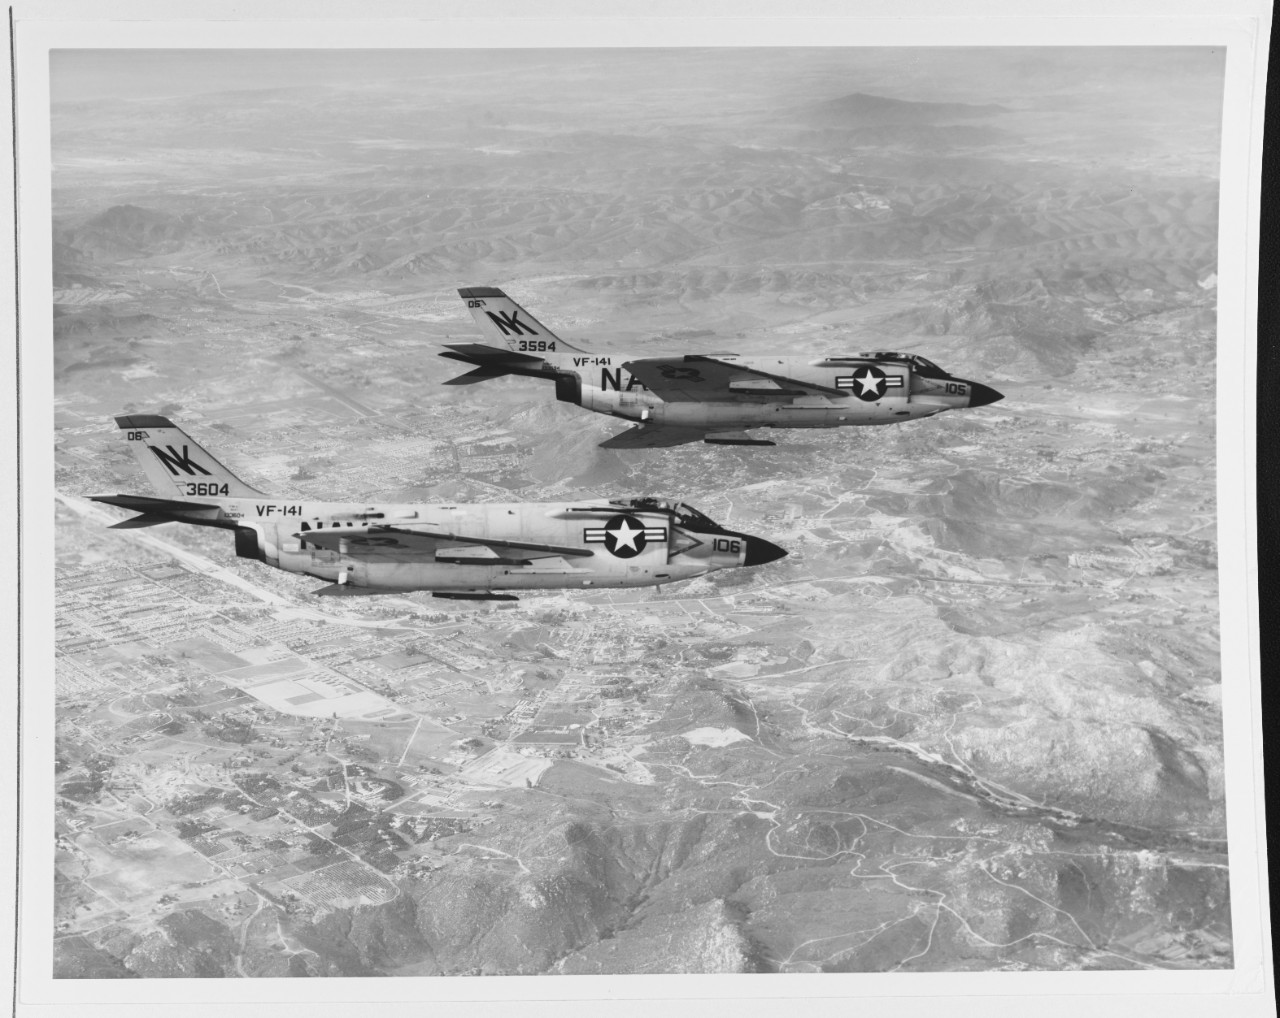 F3H-2 "demon" fighters